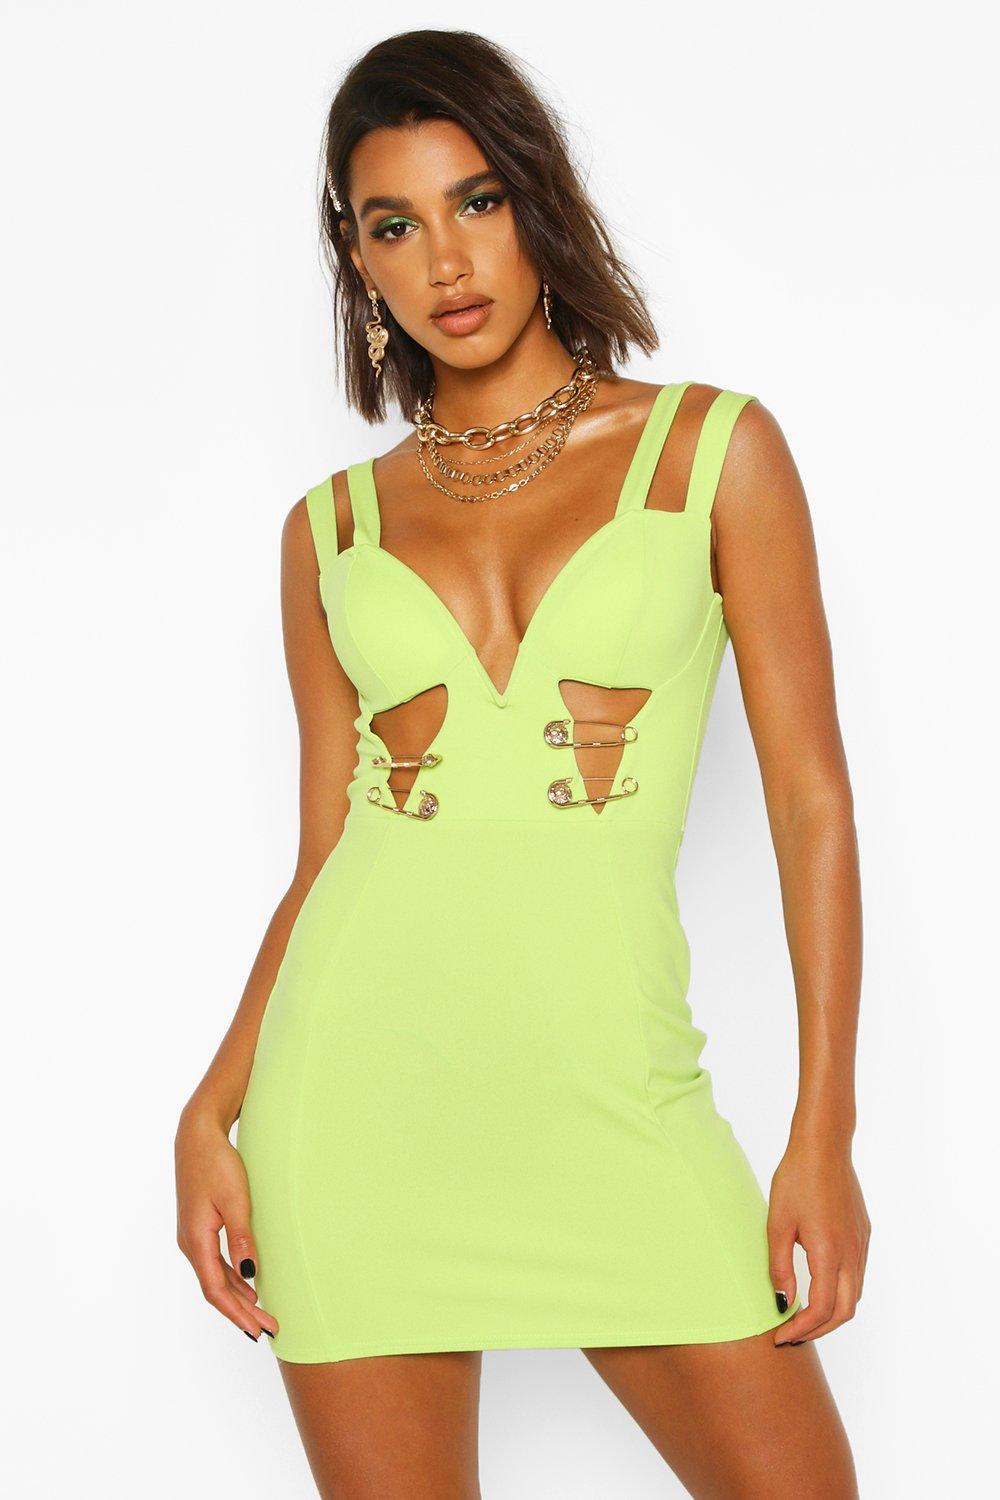 Pin on Bodycon Dresses Online